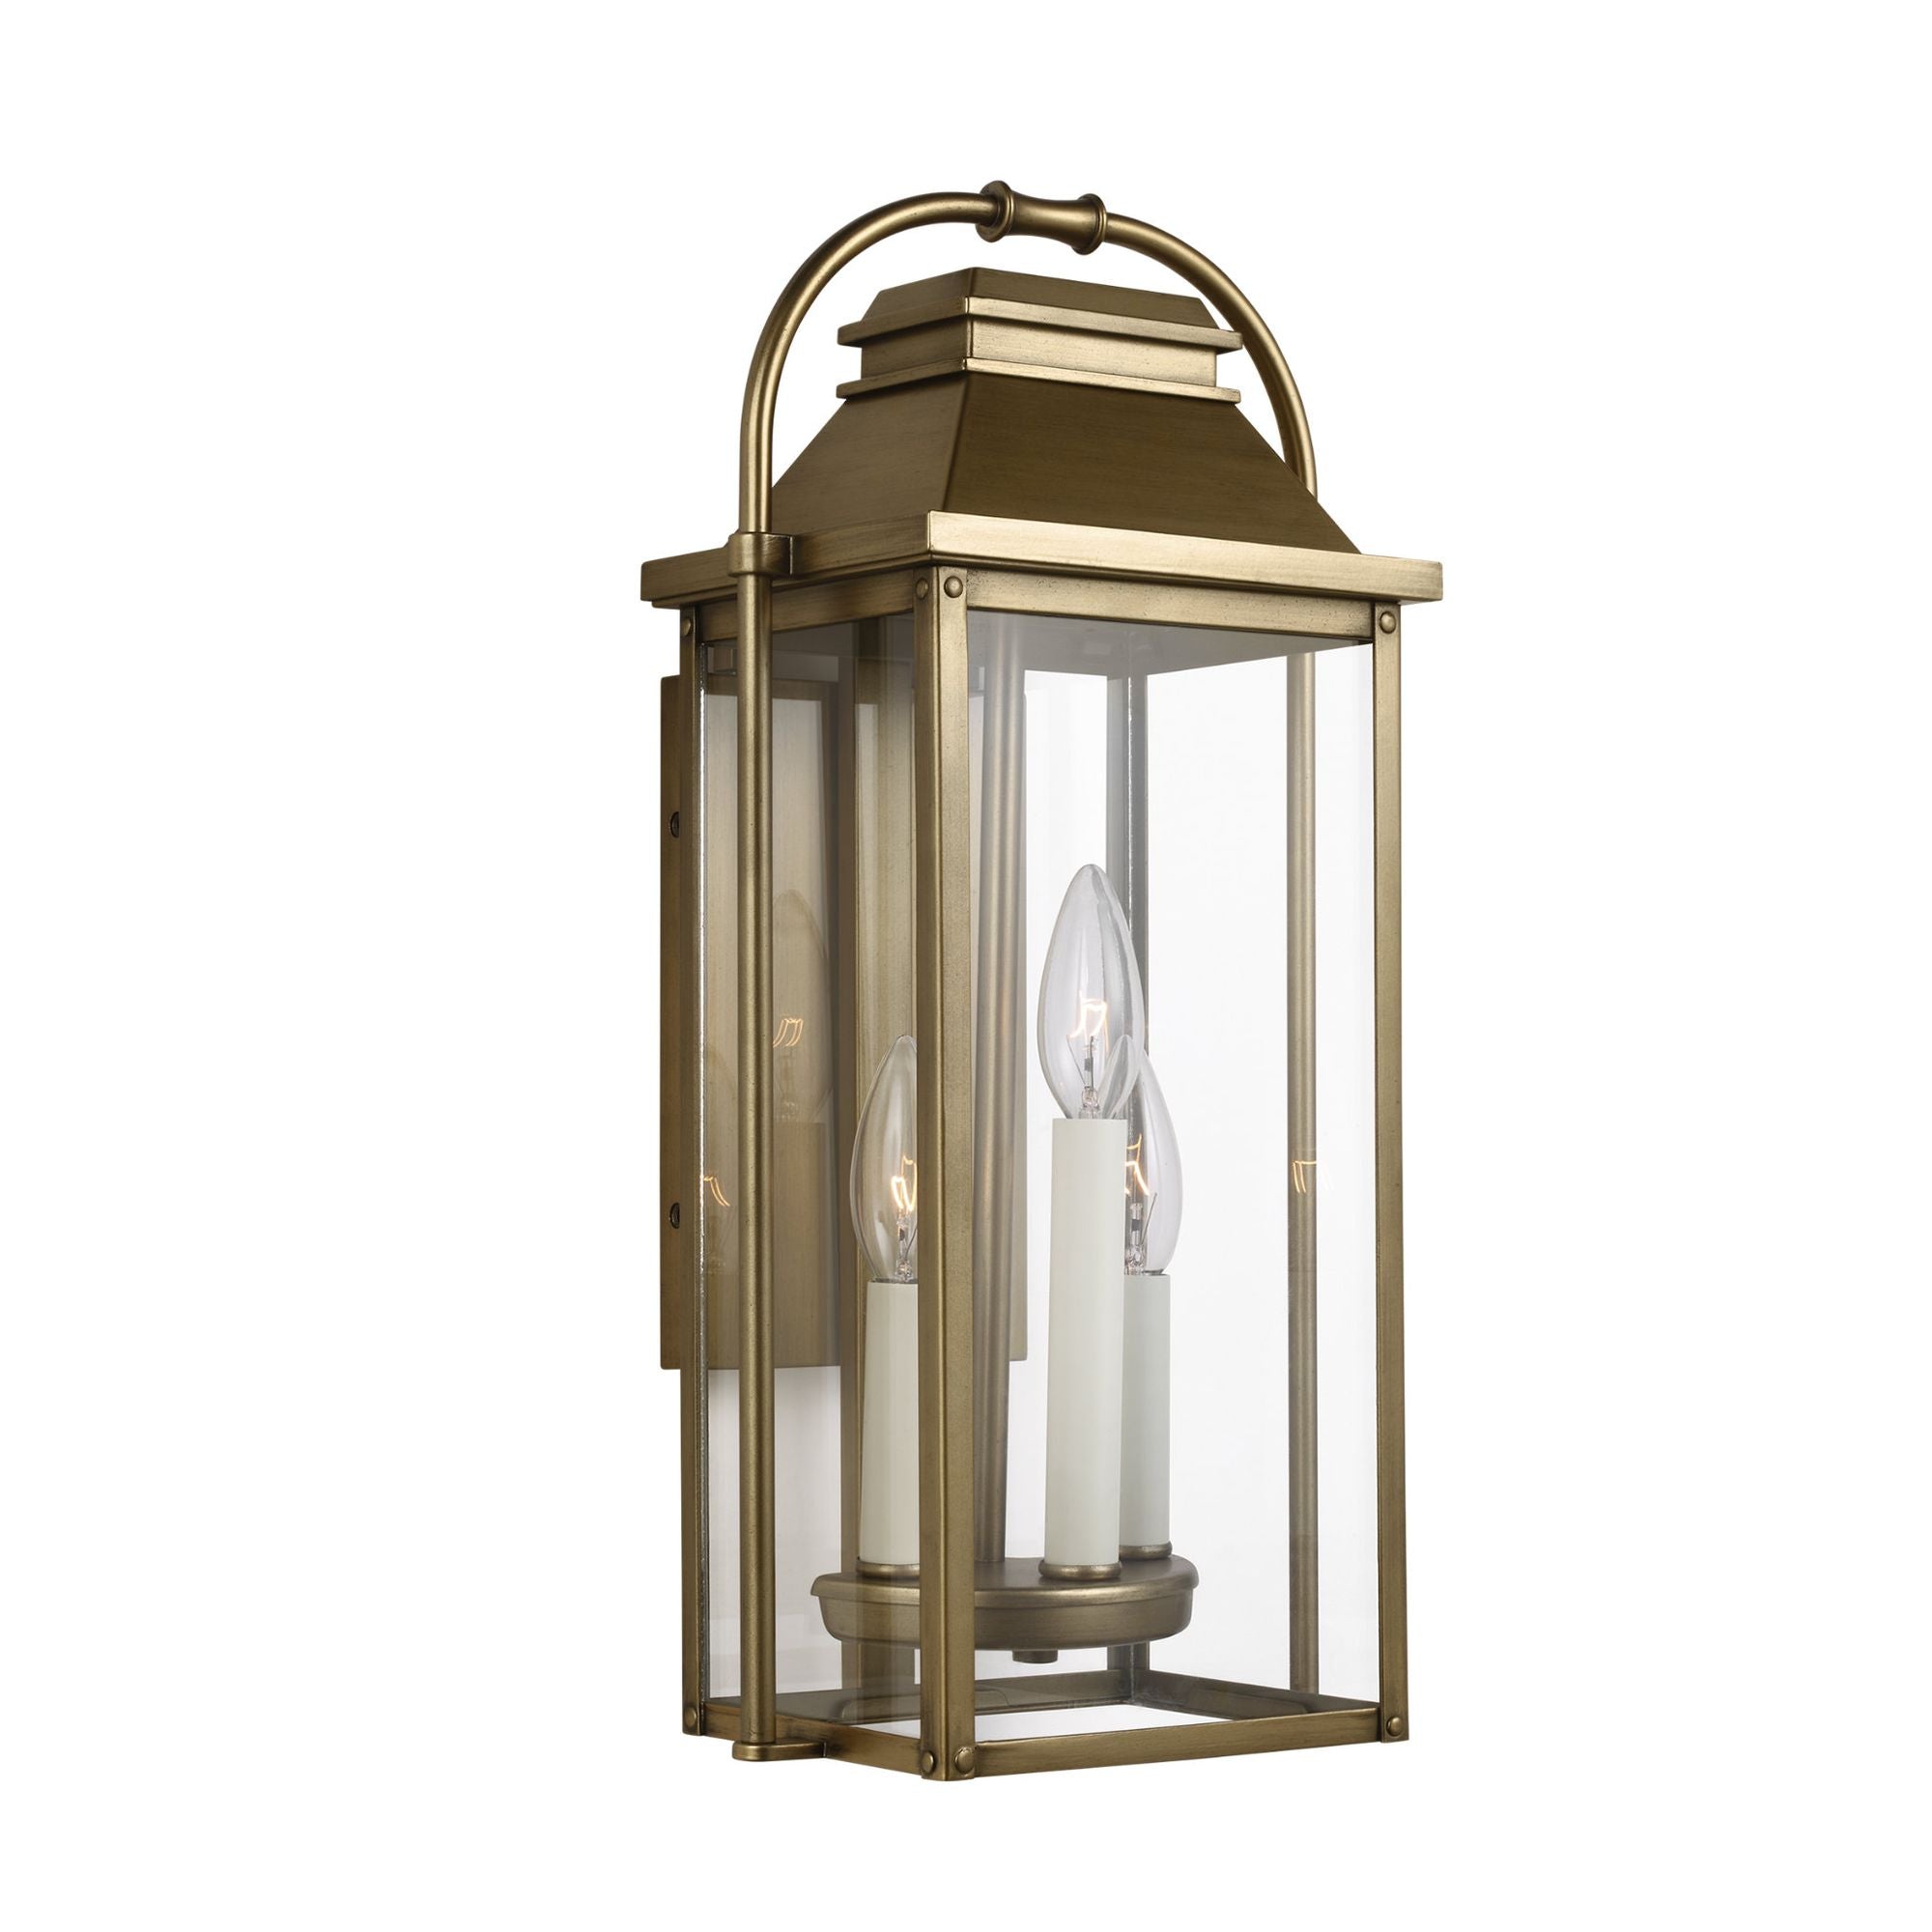 Sean Lavin Wellsworth Small Lantern in Painted Distressed Brass